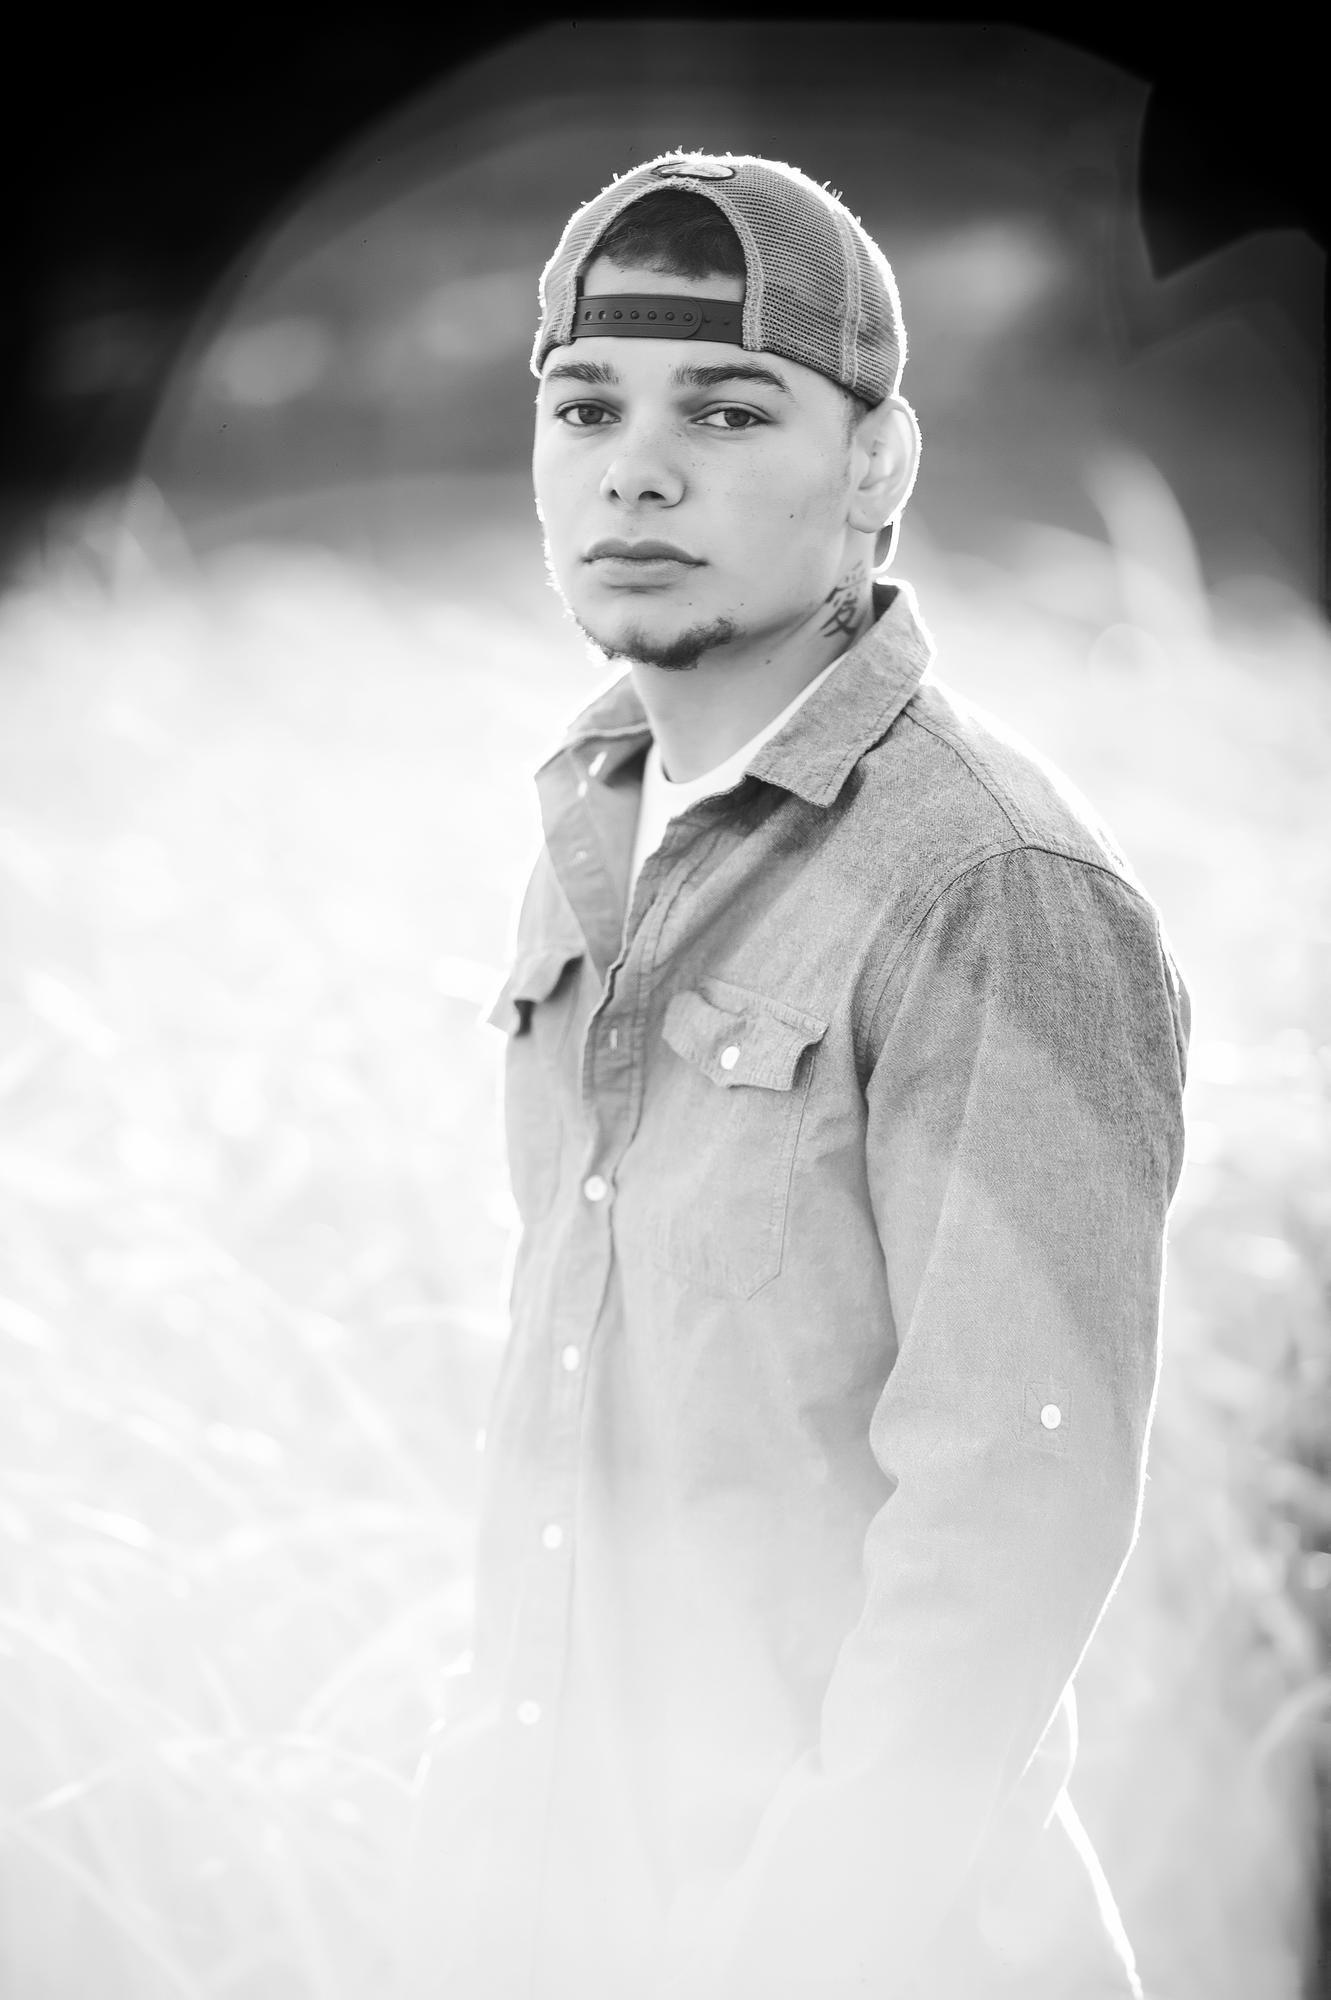 Kane Brown. Kane Brown EP Release Show Tickets in Chattanooga, TN